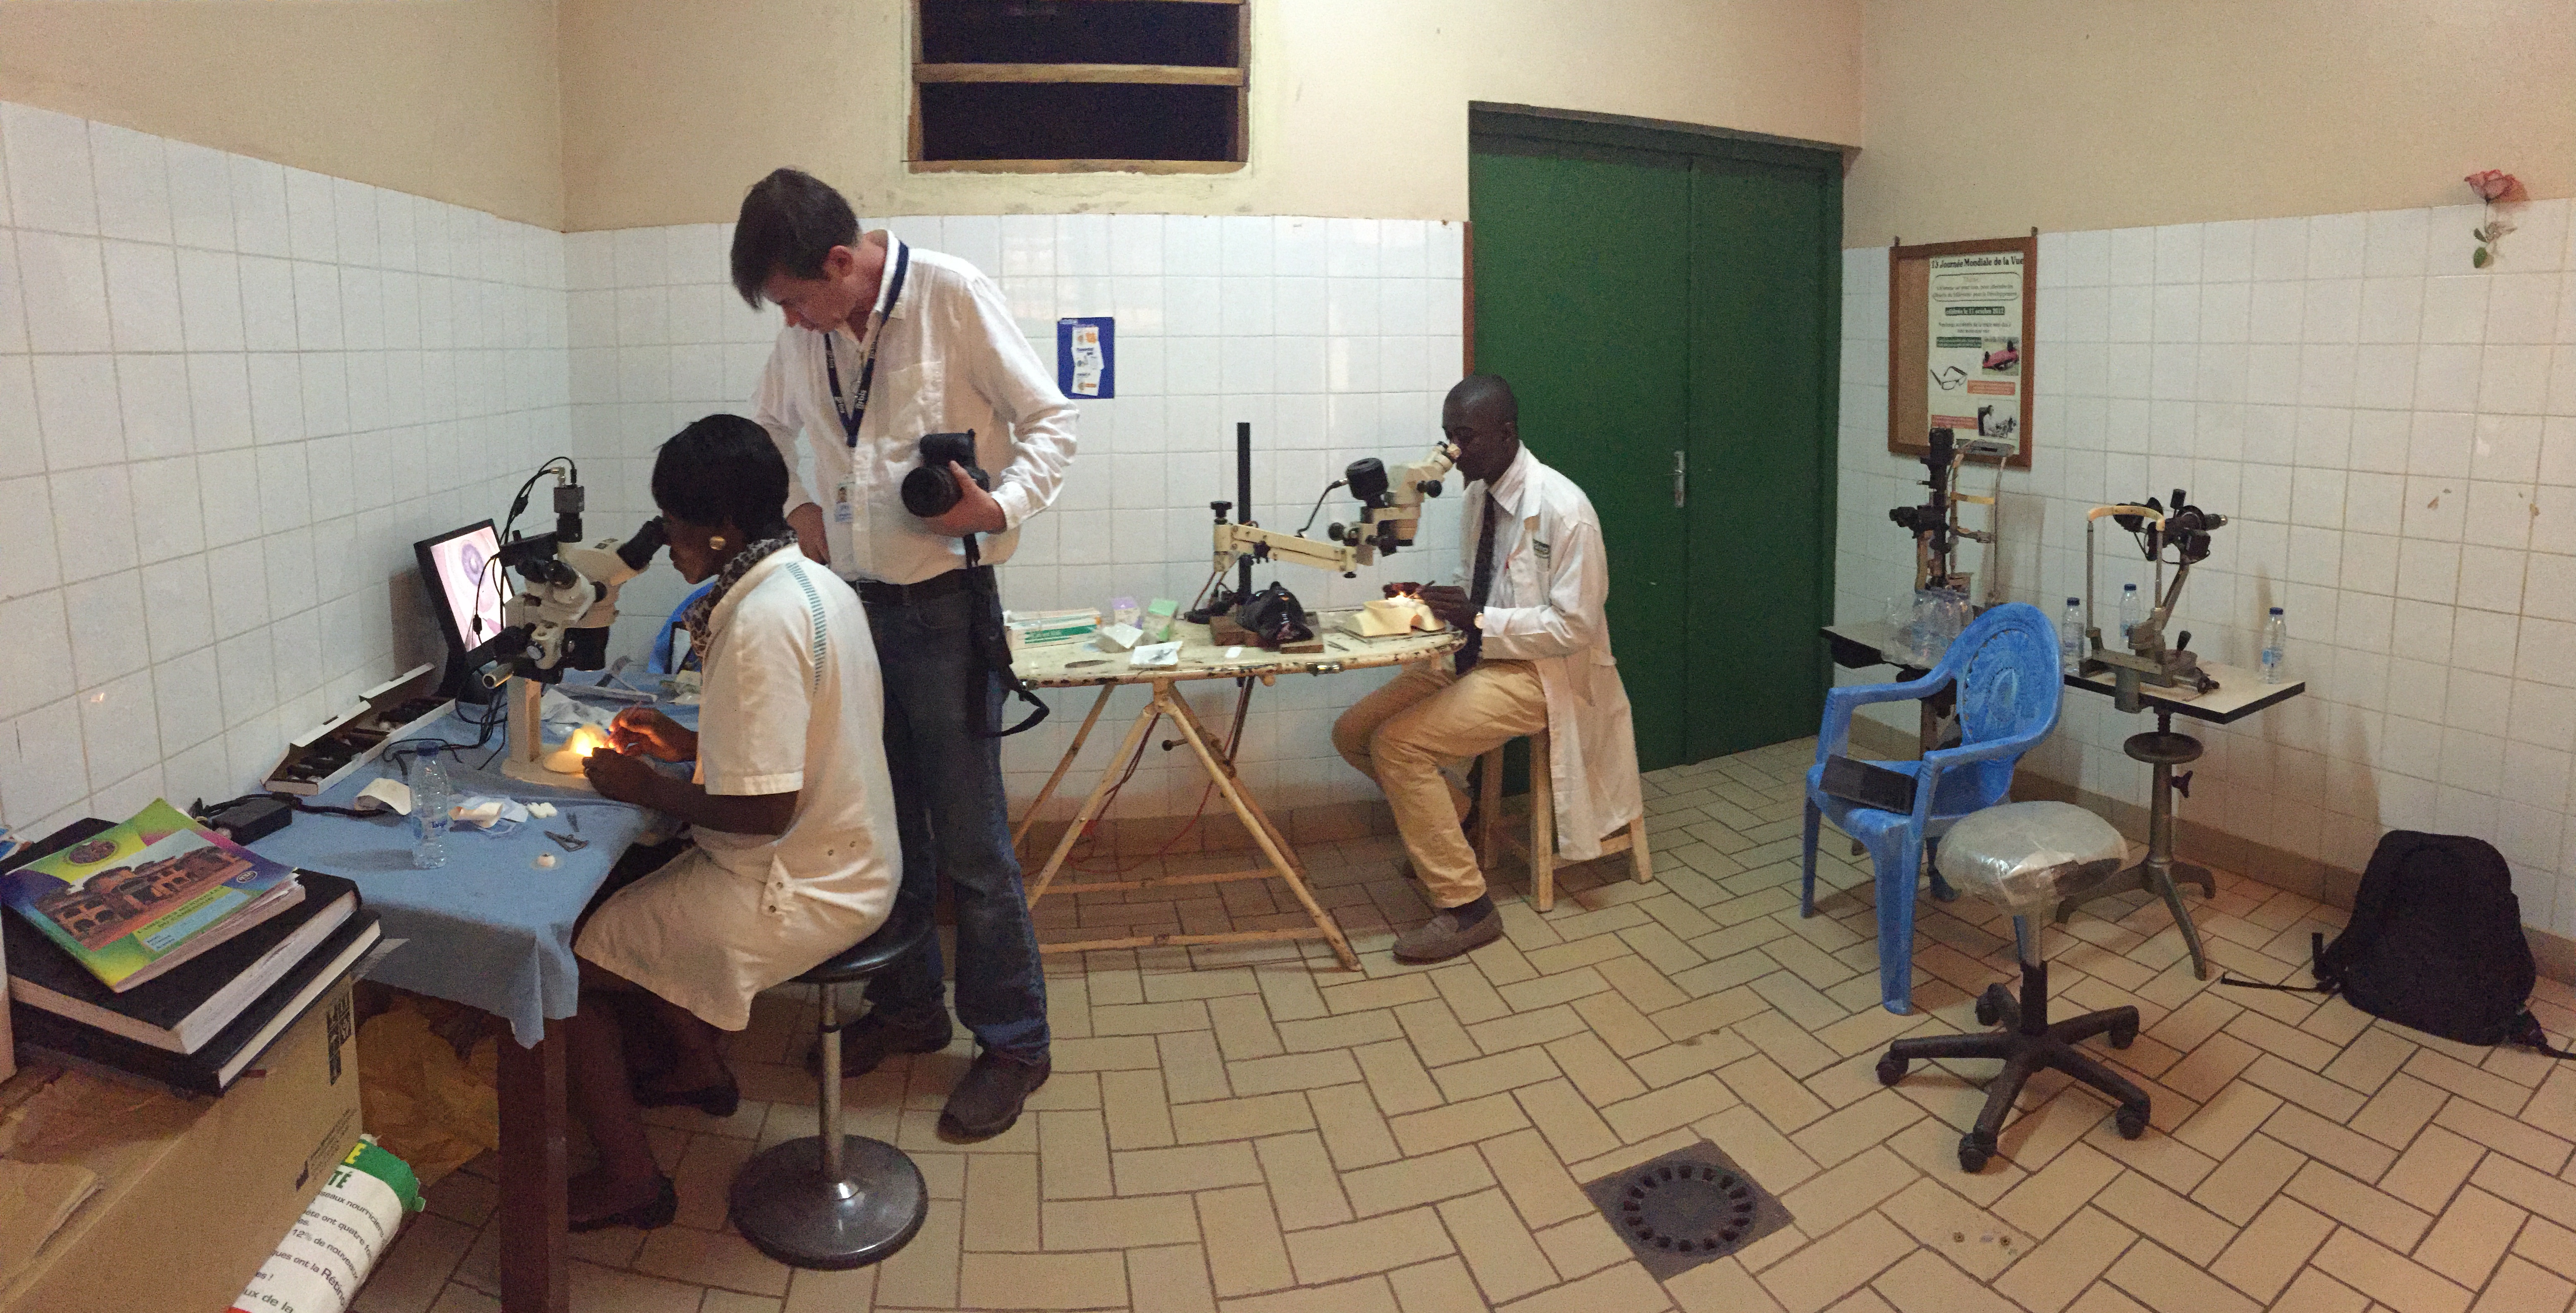 Dr. Charles Cole (Cornell University) leading a Glaucoma wet lab teaching session using model eyes in a Cameroon hospital